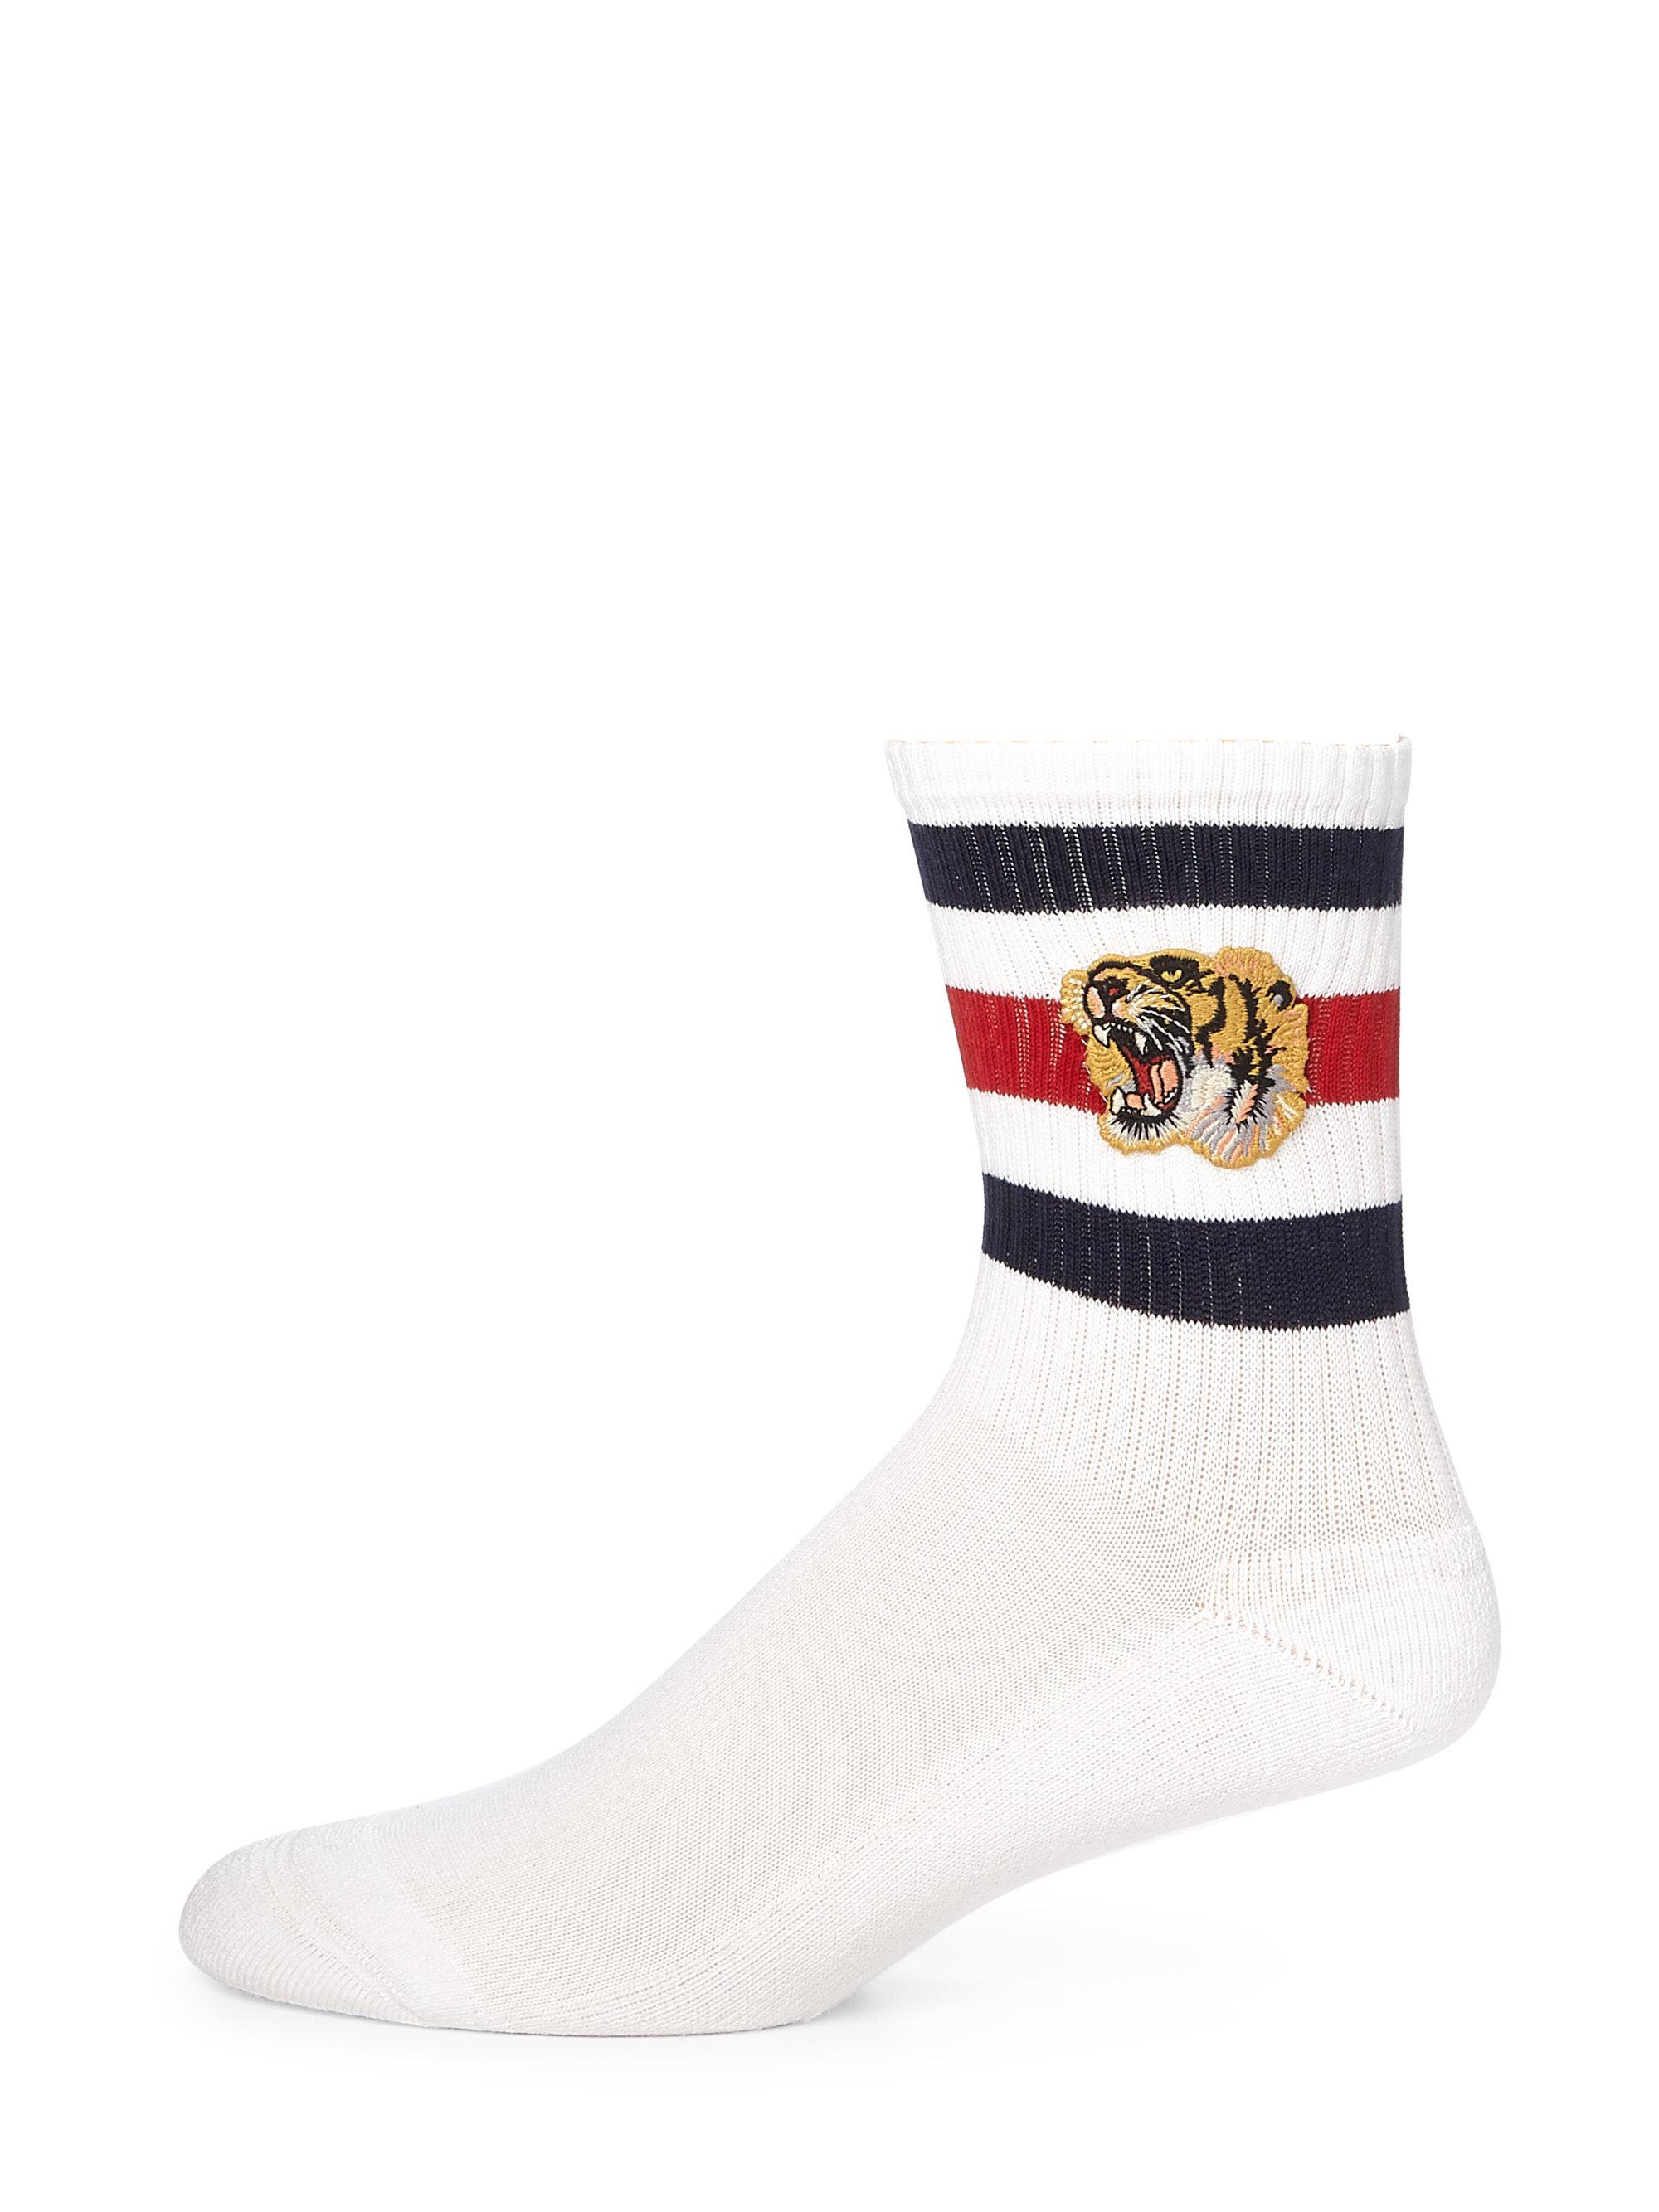 Gucci Cotton Little Tiger Striped Socks in White Blue (Blue) for Men - Lyst